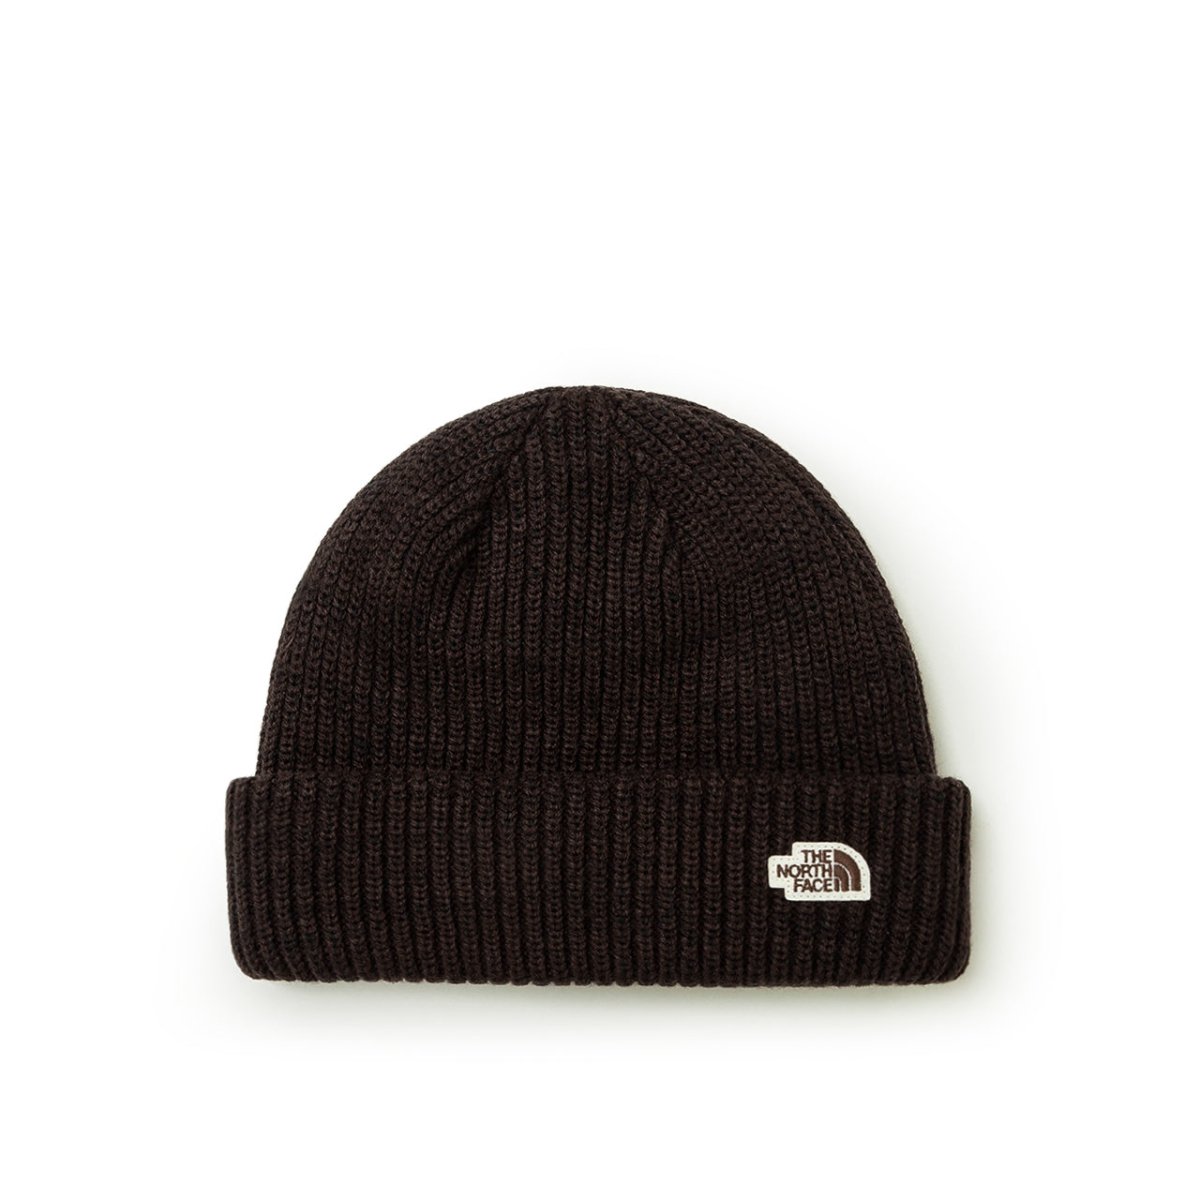 The North Face Salty Dog Beanie (Braun)  - Allike Store